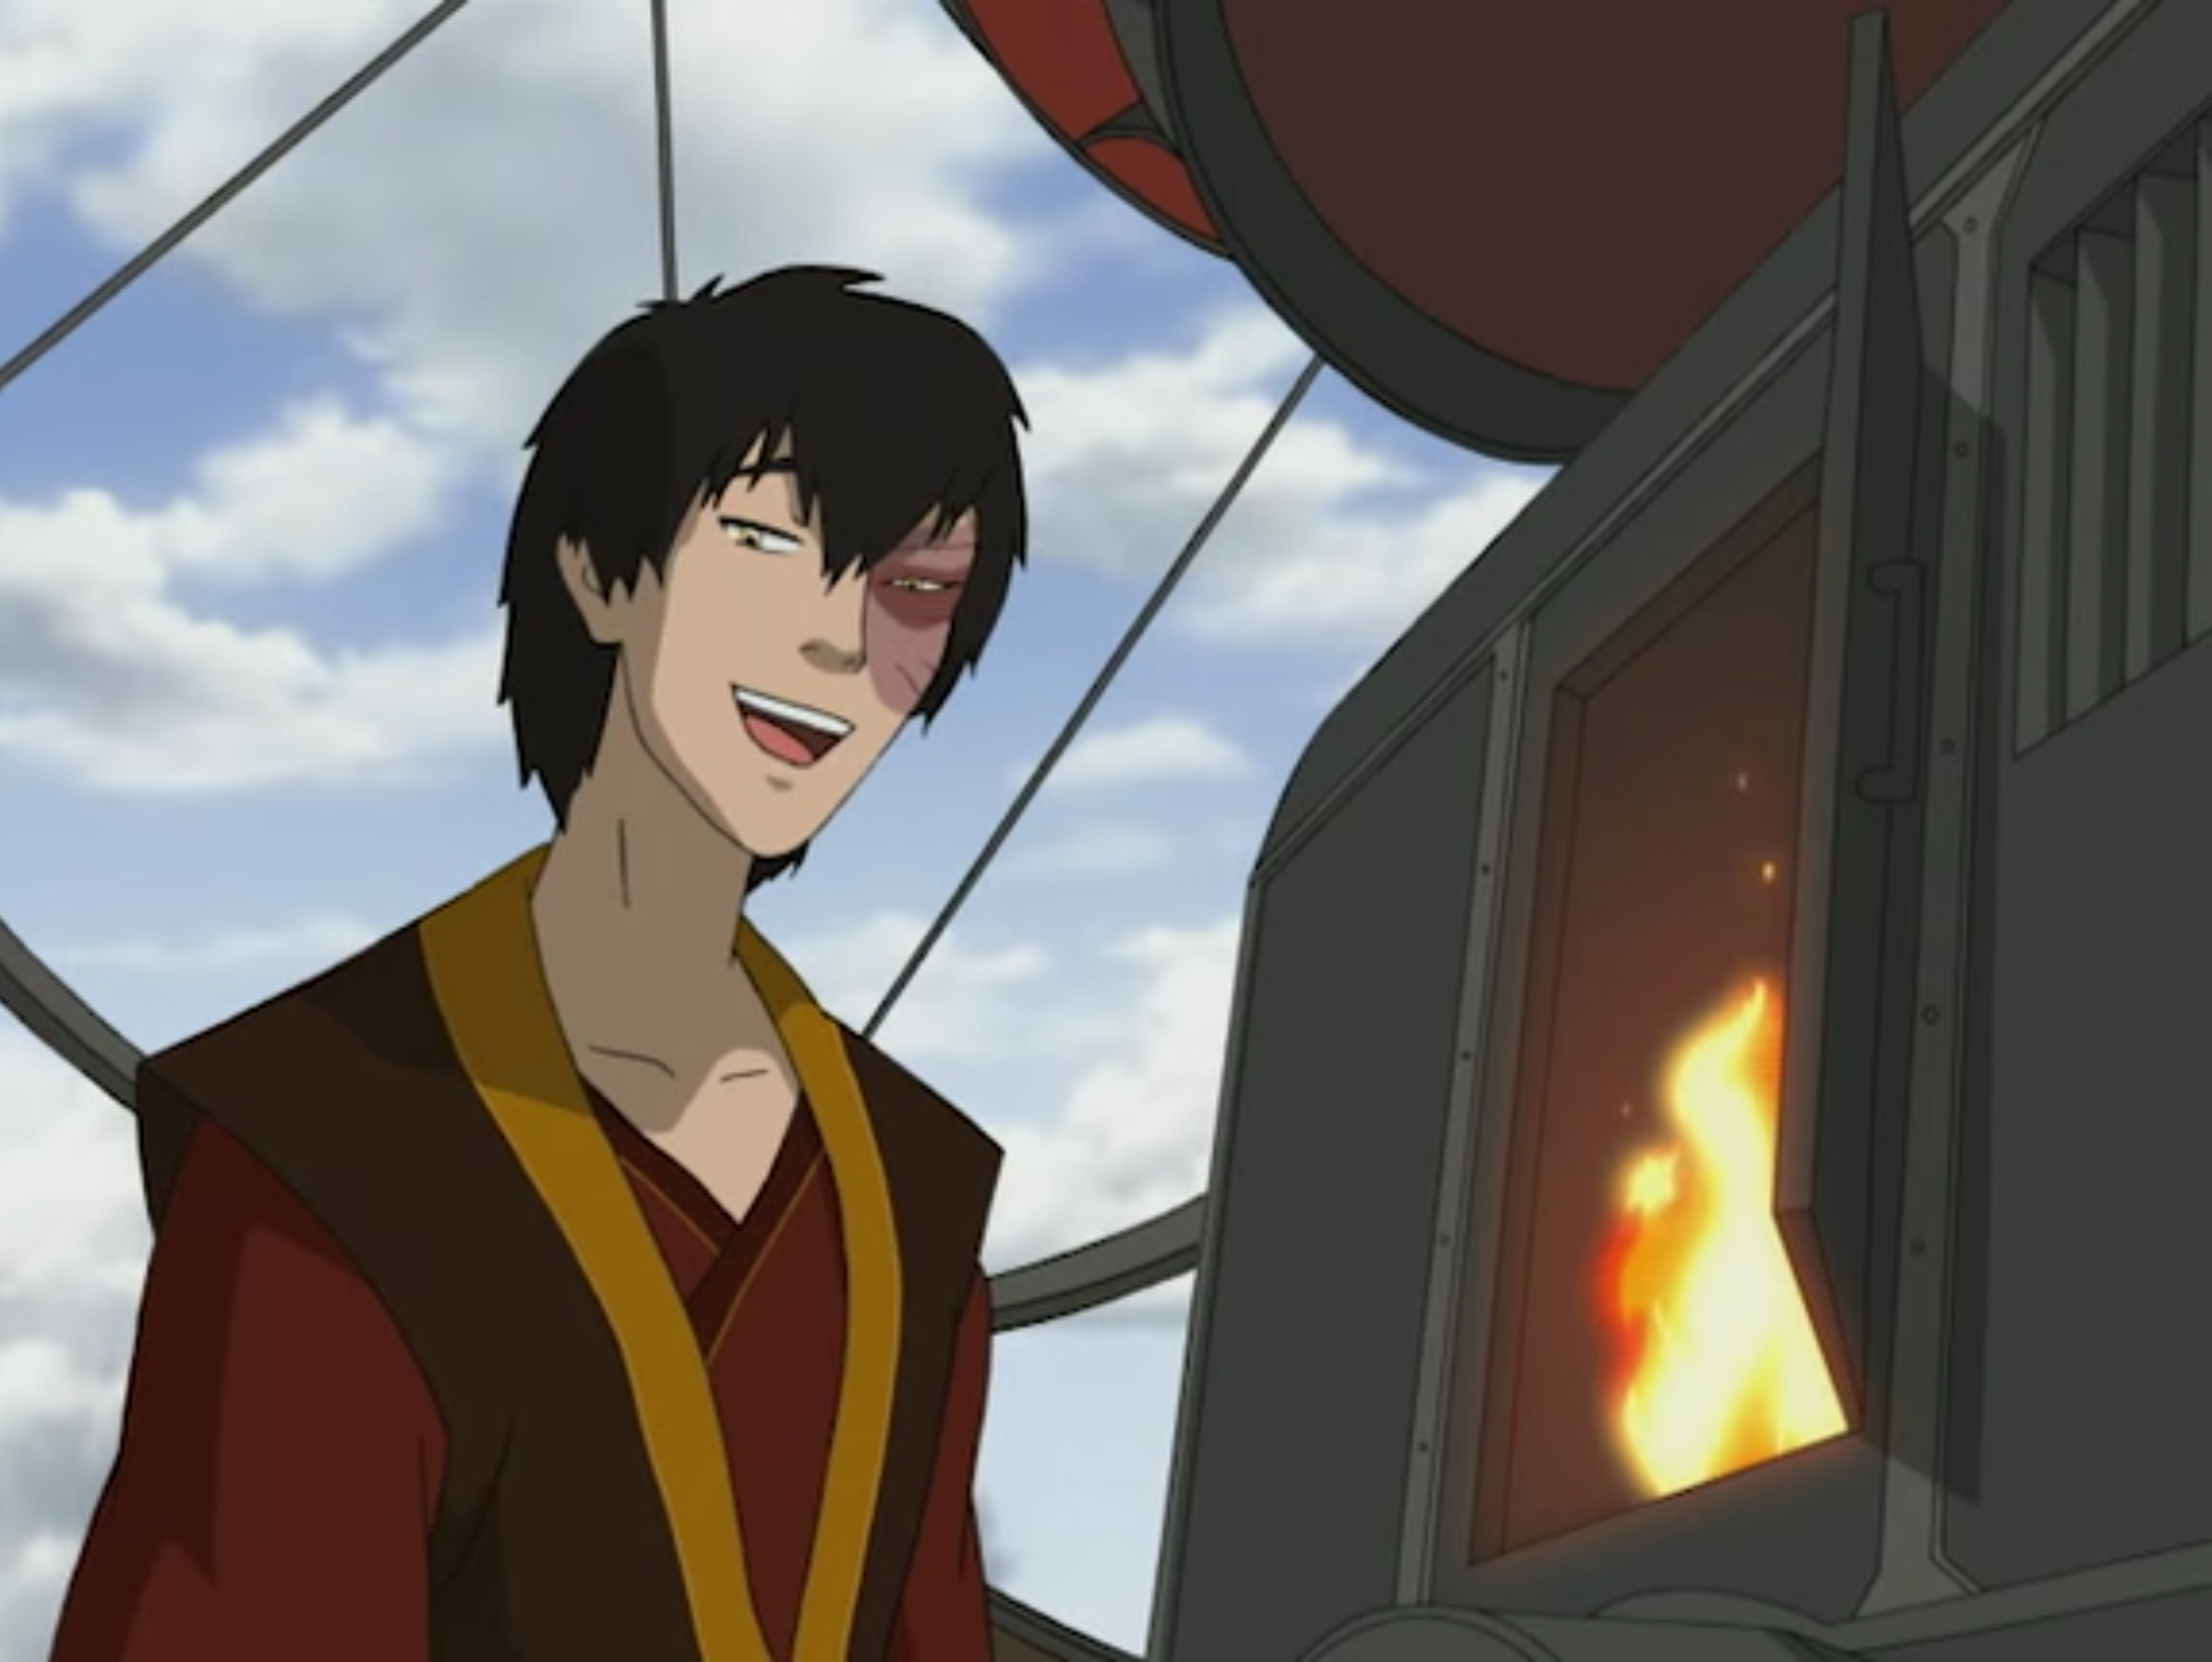 Avatar The Last Airbender 5 Reasons Why Zuko Has One Of The Best  Character Arcs On TV  Cinemablend